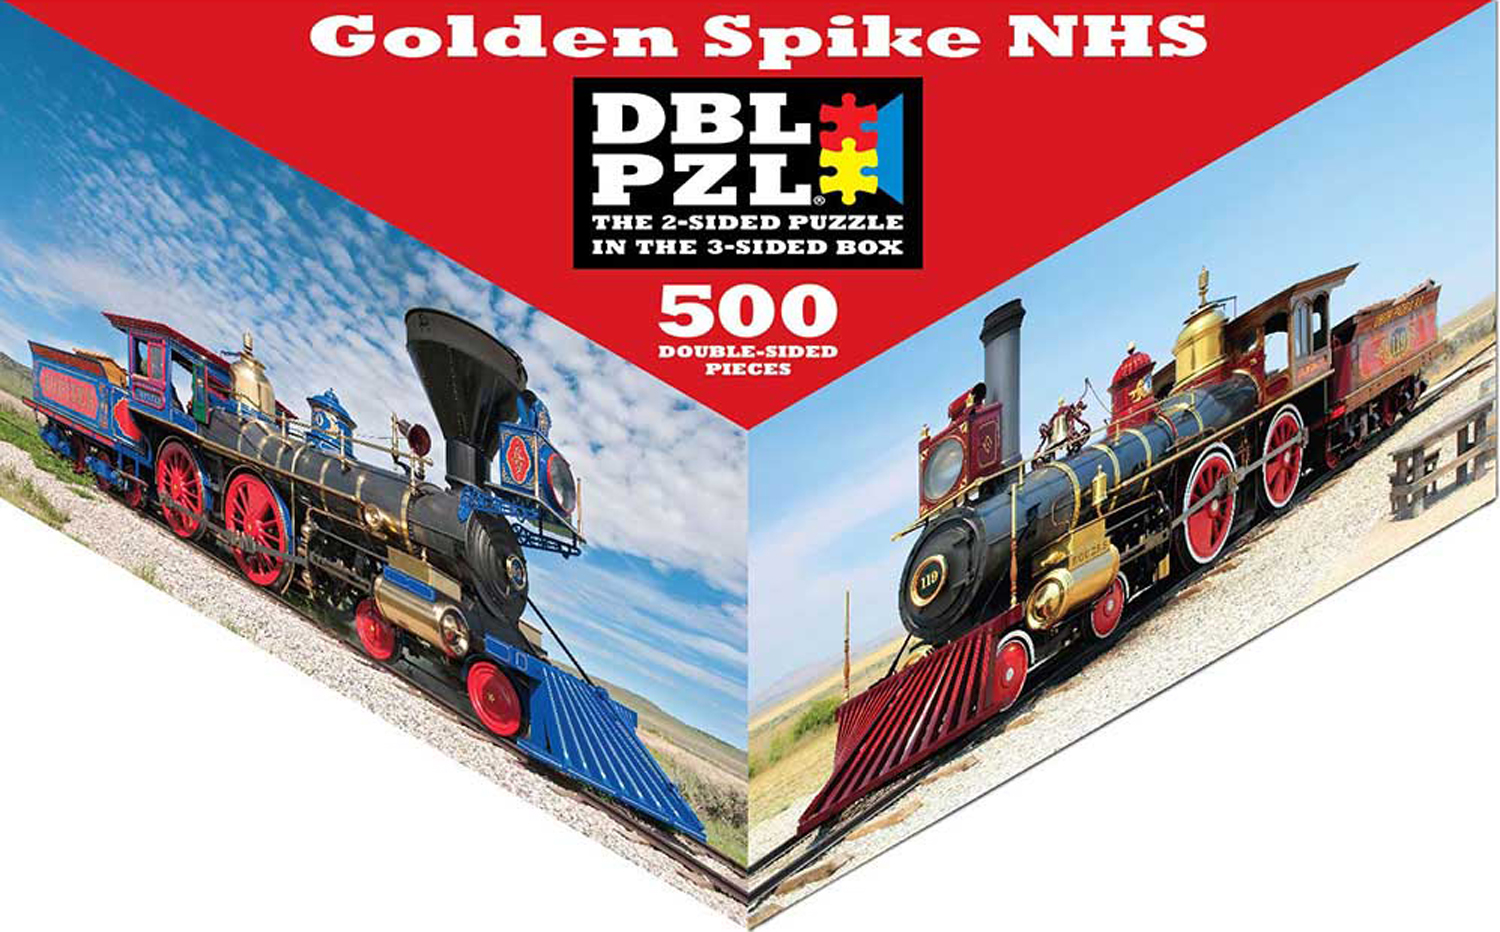 Golden Spike NHS Train Jigsaw Puzzle